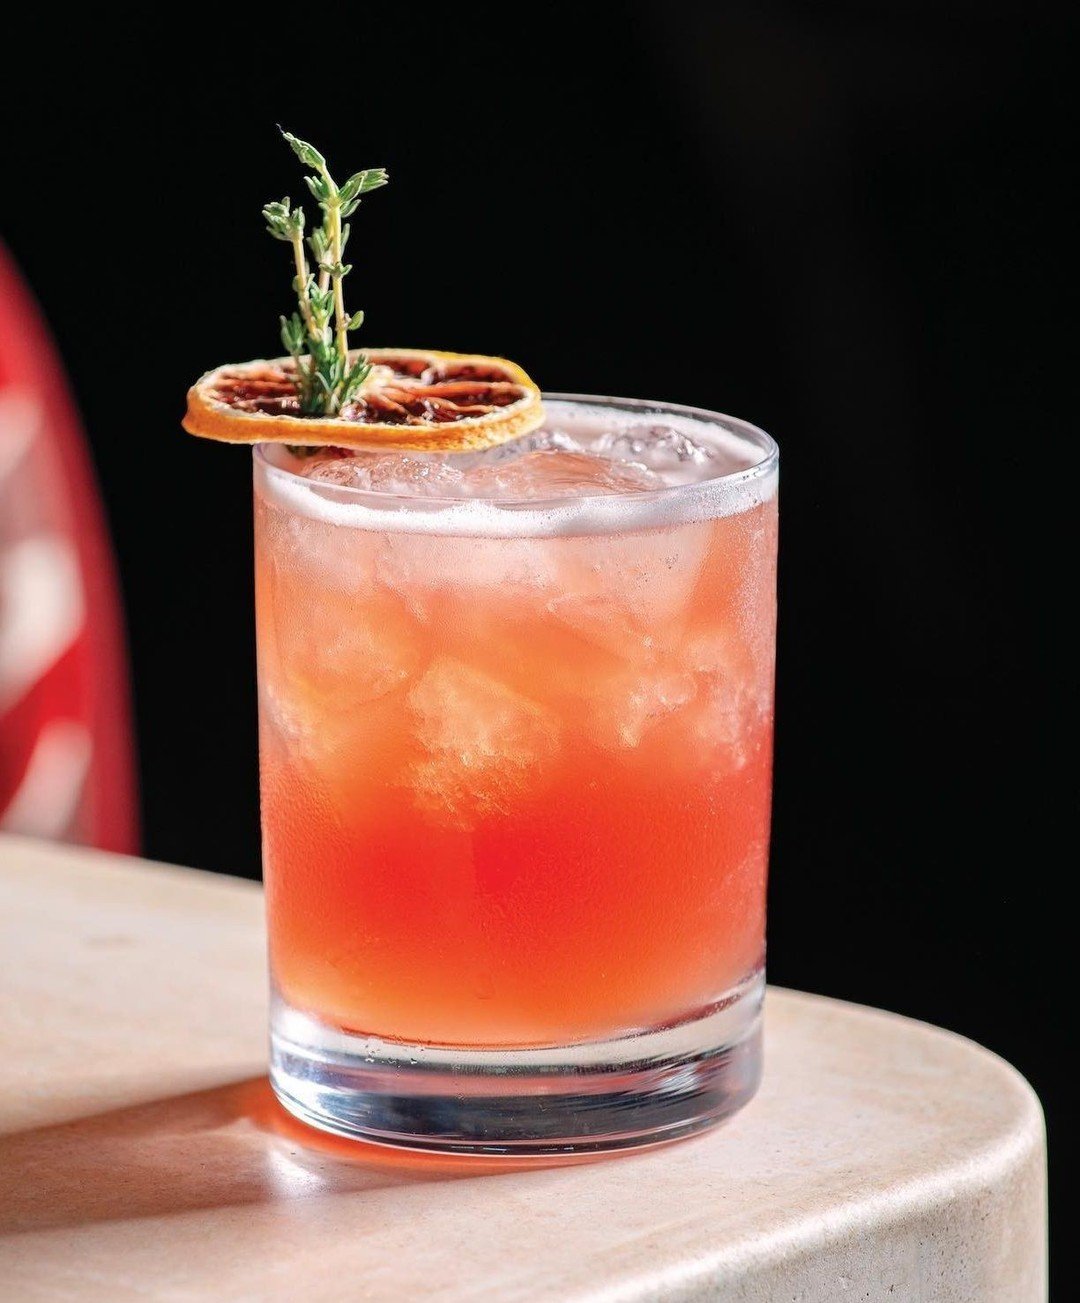 Meet Norman's 'Thyme Keeper' - as featured in @sblifeandstyle - this bourbon-amaro concoction is punched up with a housemade pomegranate reduction syrup, bruto americano, ginger beer, and topped with a sprig of thyme and a blood orange. Fresh, herbal